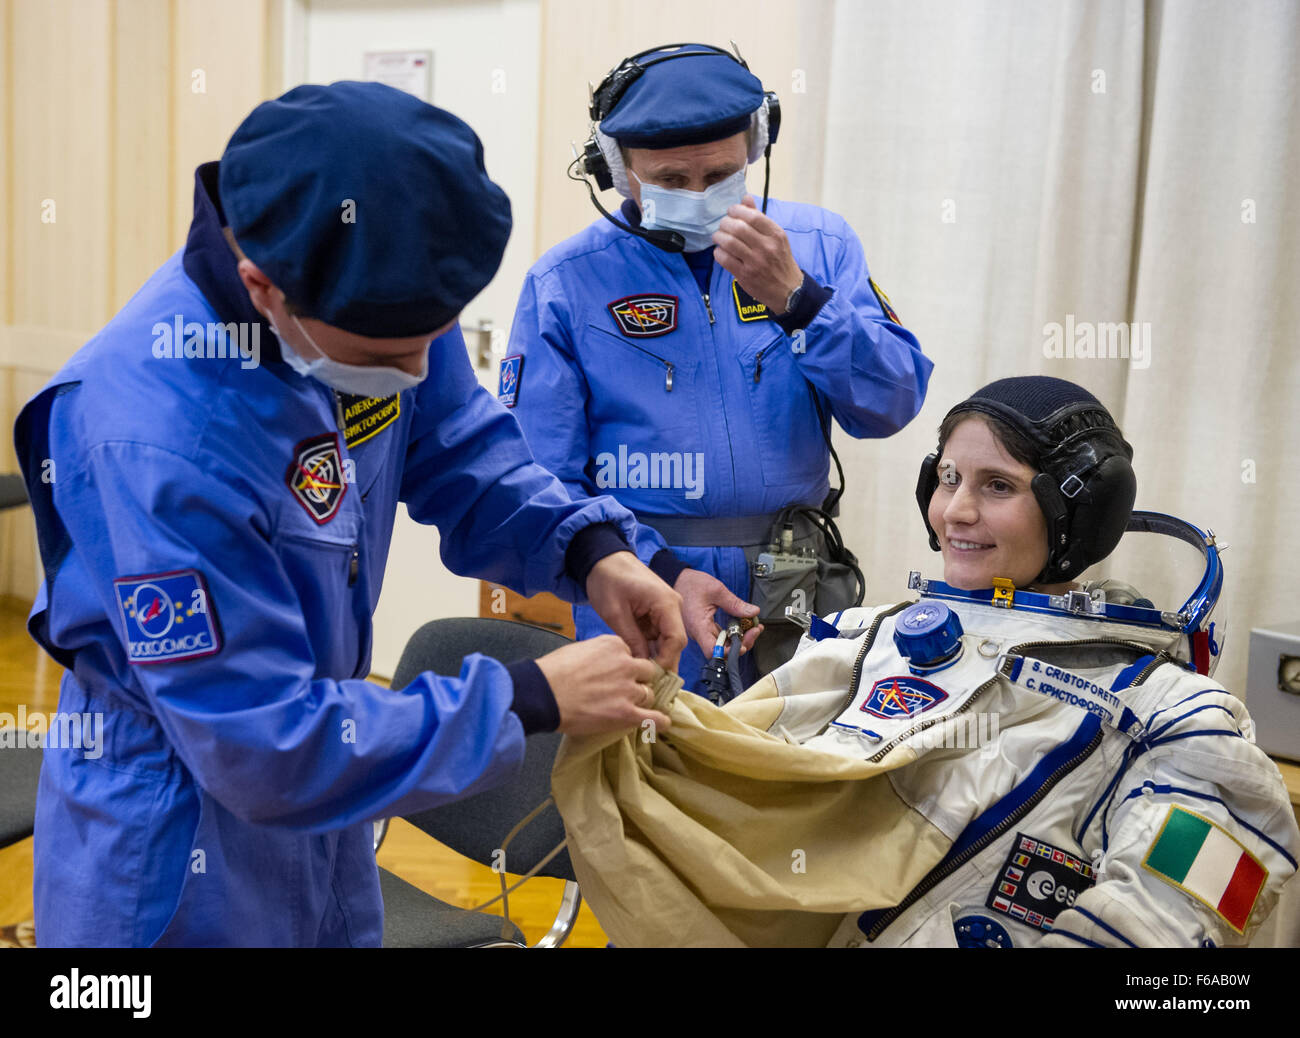 Expedition 42 Flight Engineer Samantha Cristoforetti of the European Space Agency (ESA) is helped into her Russian Sokol suit as she and fellow crewmates, Flight Engineer Terry Virts of NASA and Soyuz Commander Anton Shkaplerov of the Russian Federal Space Agency (Roscosmos), prepare for their Soyuz launch to the International Space Station, on Sunday, Nov. 23, 2014, at the Baikonur Cosmodrome in Baikonur, Kazakhstan. Launch of the Soyuz rocket is scheduled for the early hours of Nov. 24 and will carry Virts, Cristoforetti, and Shkaplerov into orbit to begin their five and a half month mission Stock Photo